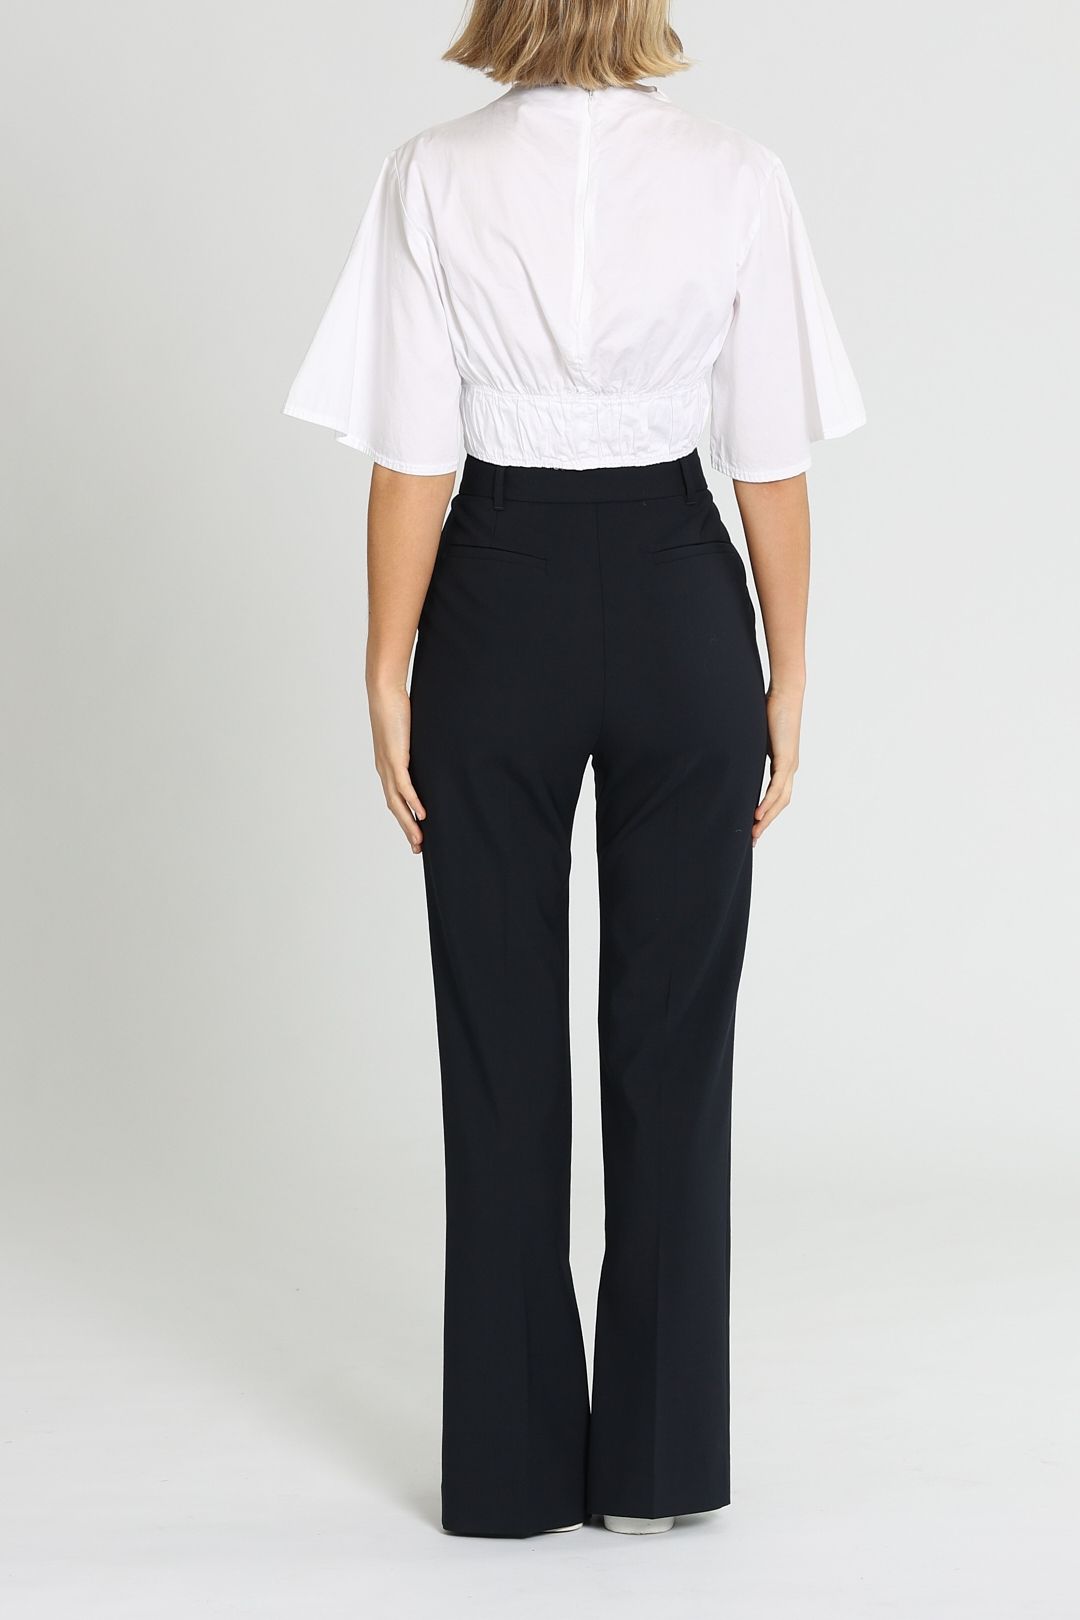 Camilla and Marc Abel Tailored Pant Navy